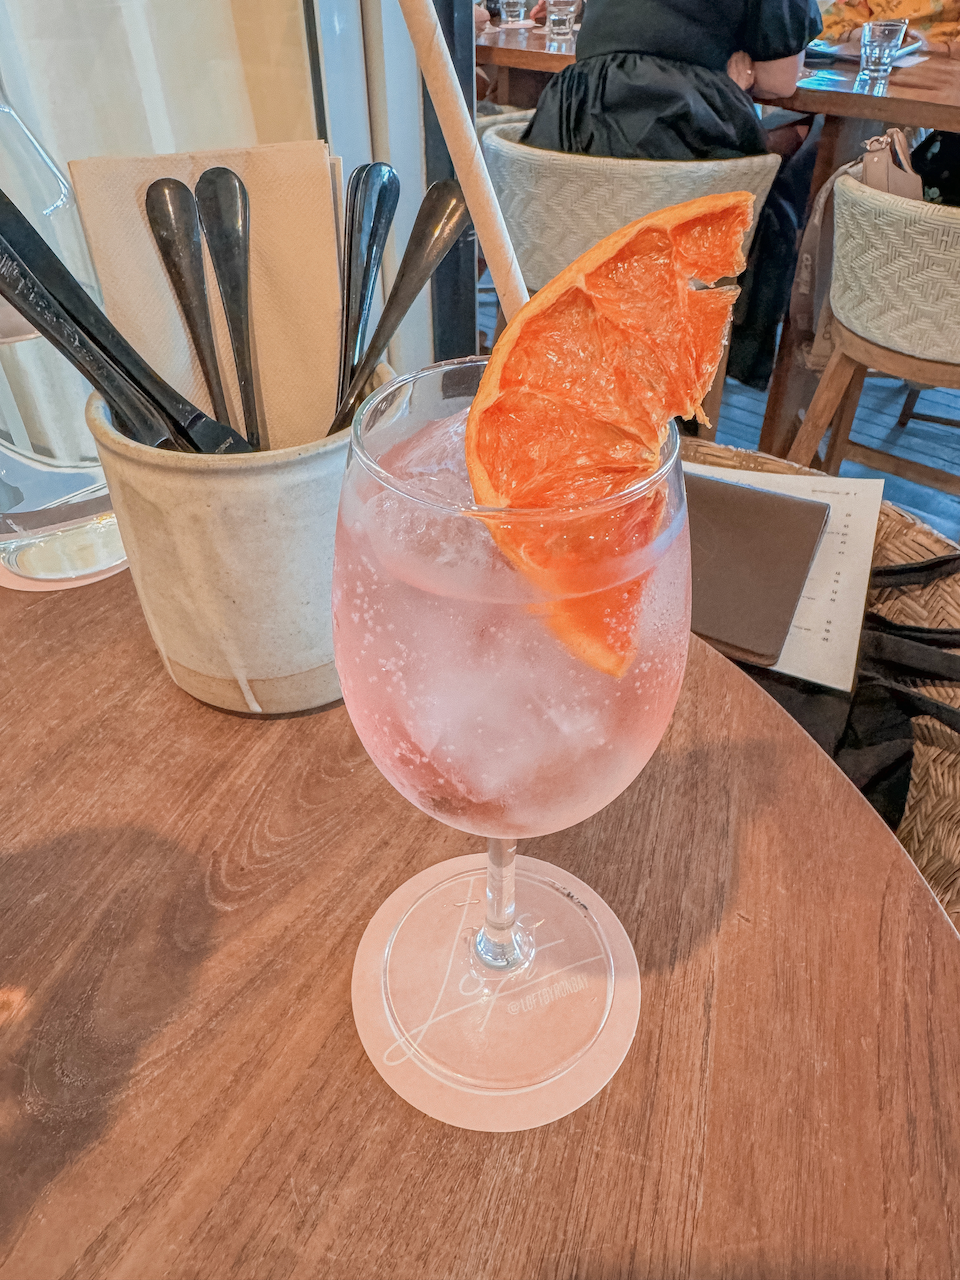 Grapefruit pink spritz from the Loft - Byron Bay - New South Wales - Australia